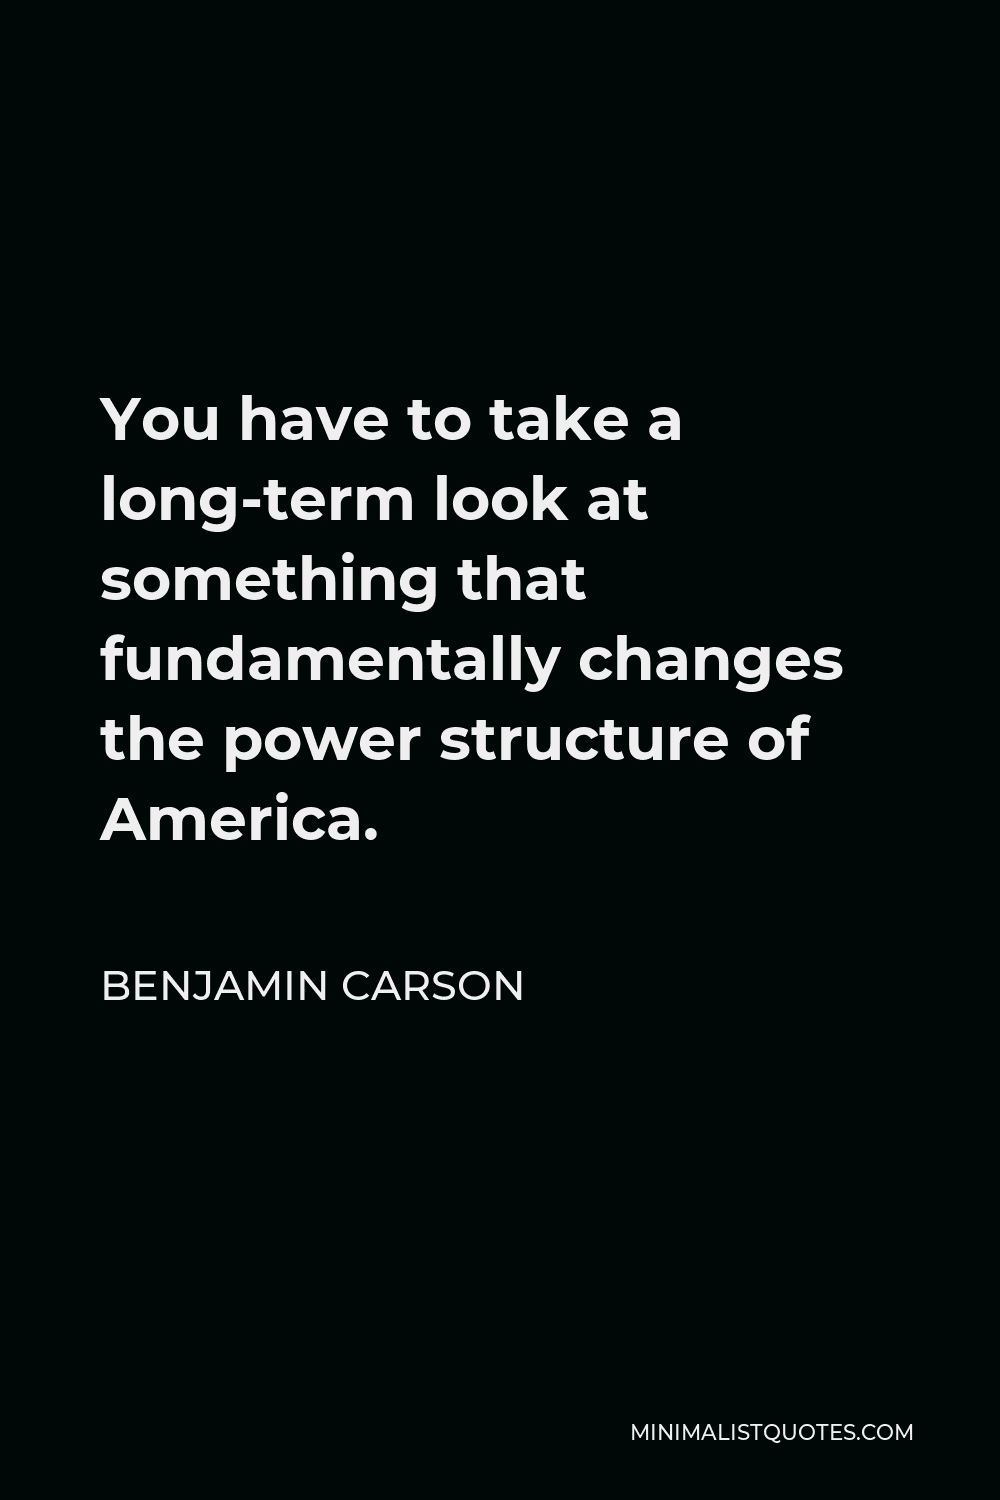 Benjamin Carson Quote - You have to take a long-term look at something that fundamentally changes the power structure of America.